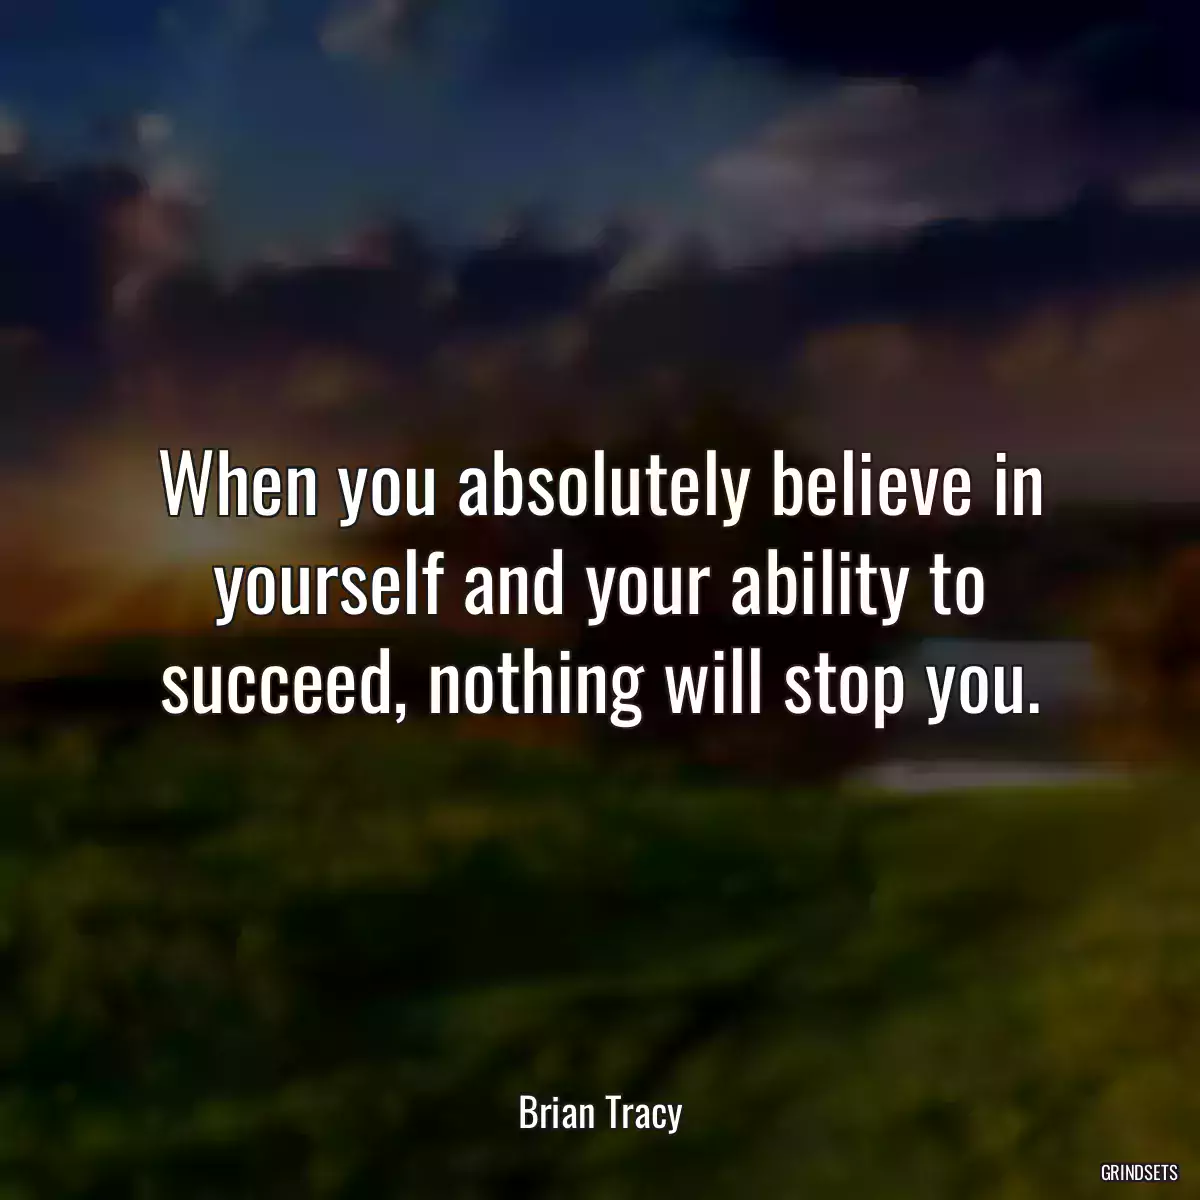 When you absolutely believe in yourself and your ability to succeed, nothing will stop you.